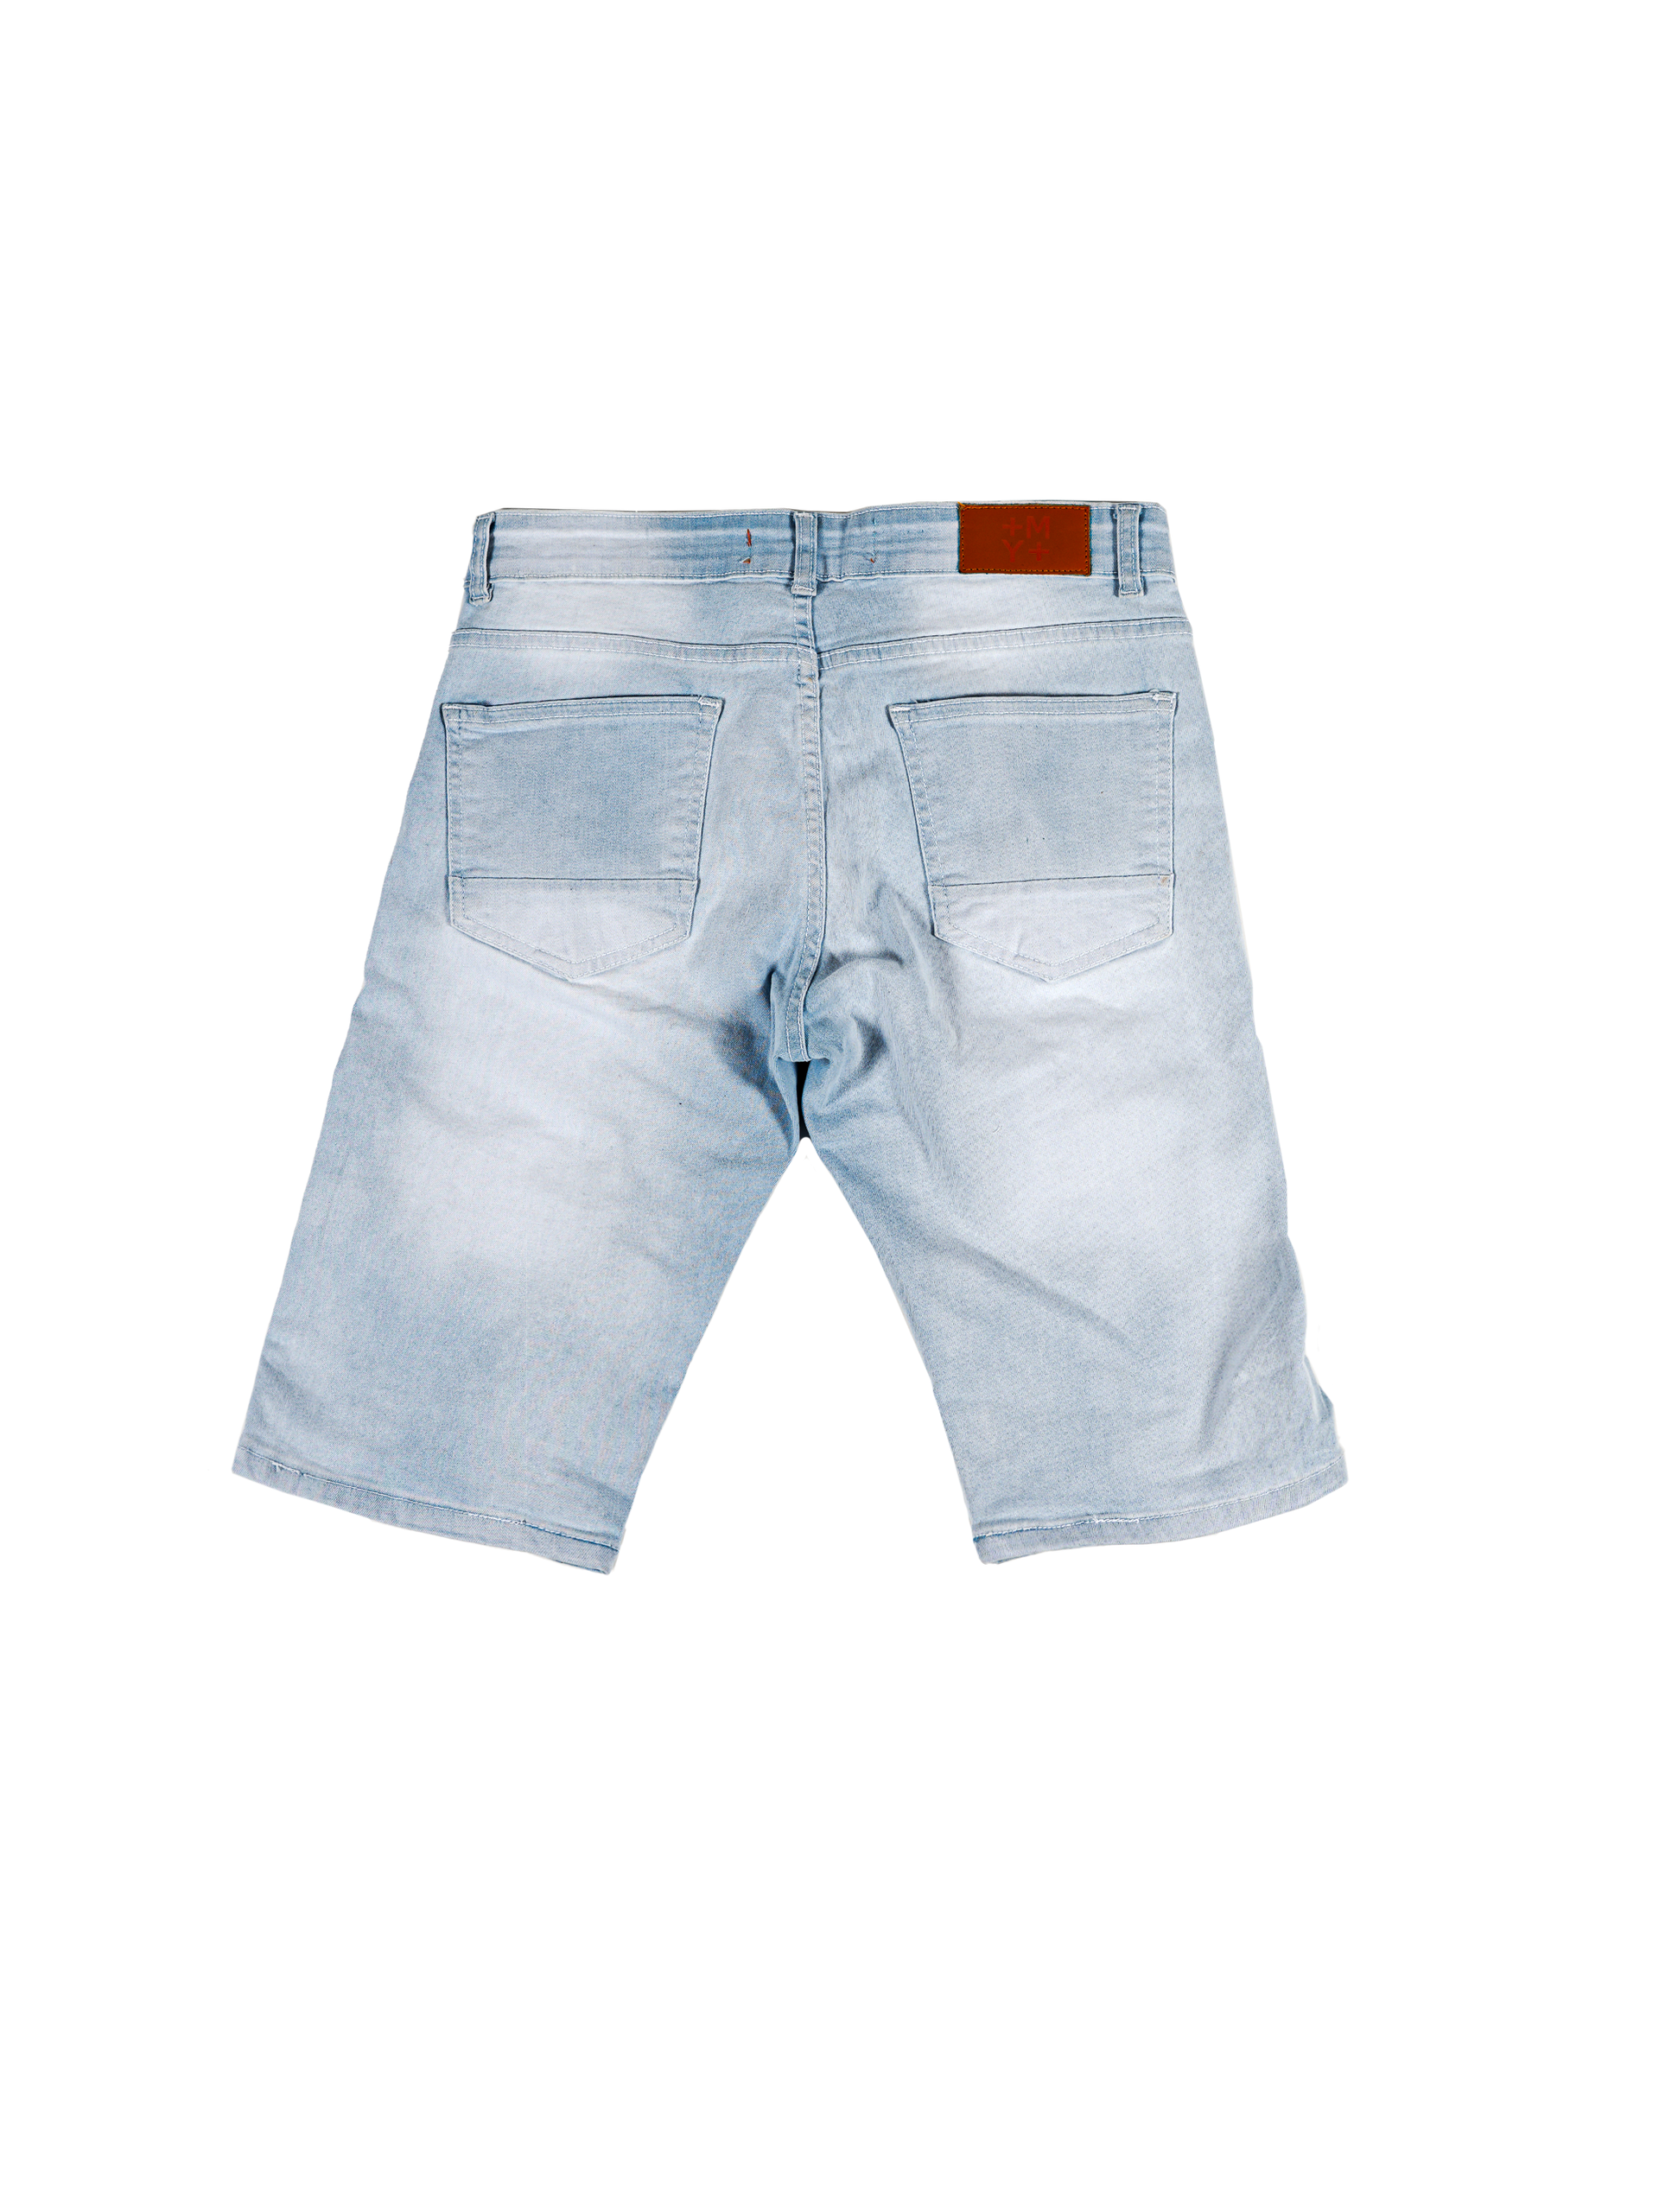 KINZIE | Men's Slim Fit Cutoff Knee Length Destroyed Ripped Patched Distressed Denim Jean Shorts in Light Blue Wash